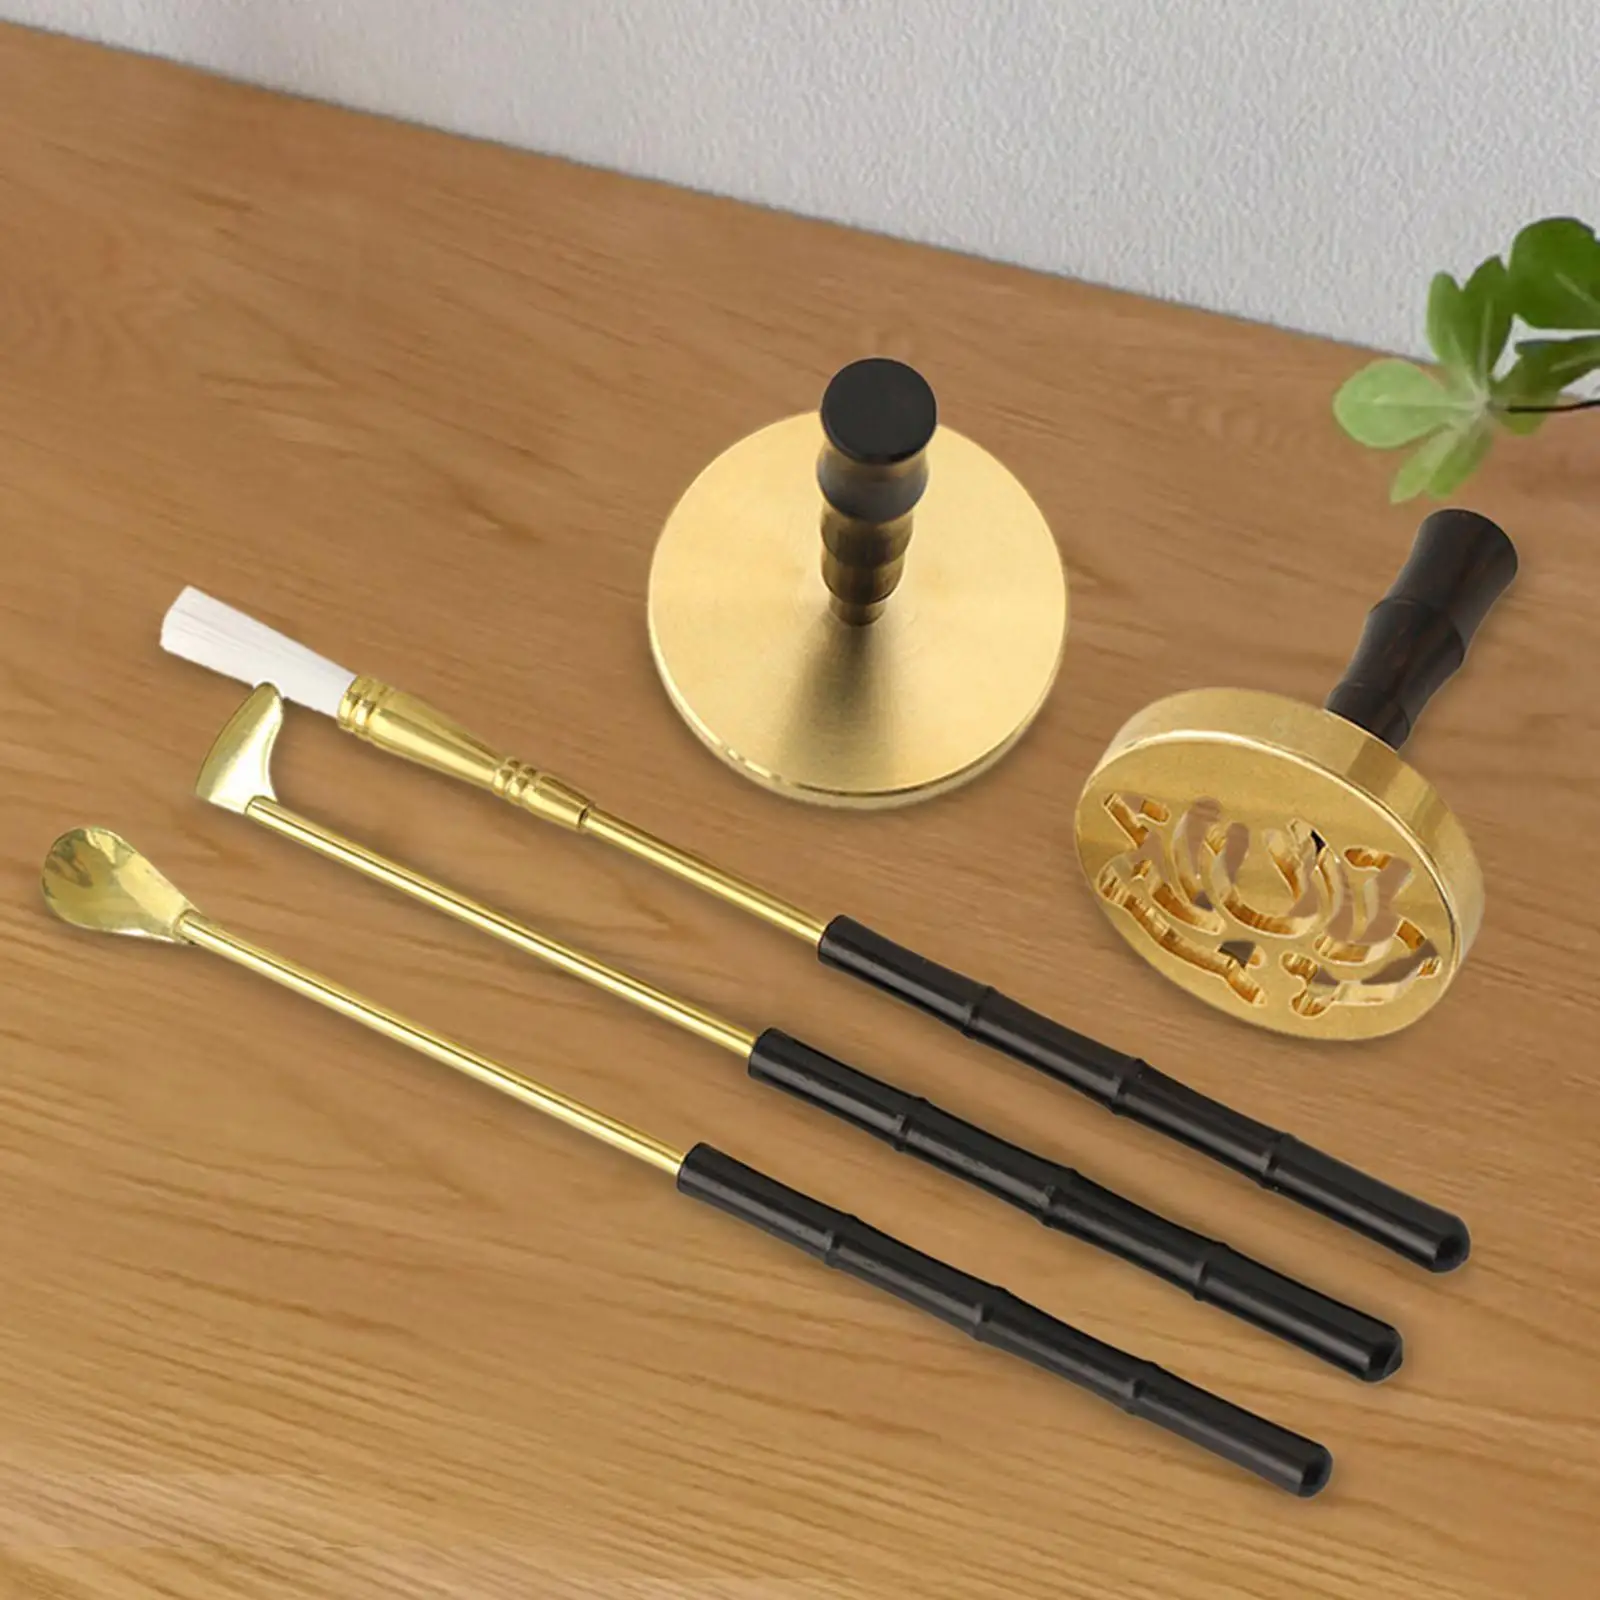 5 Pieces Incense Tool Starter Tools Supplies Professional Incense Making Long Handle Brush Press Spoon for Living Room Home